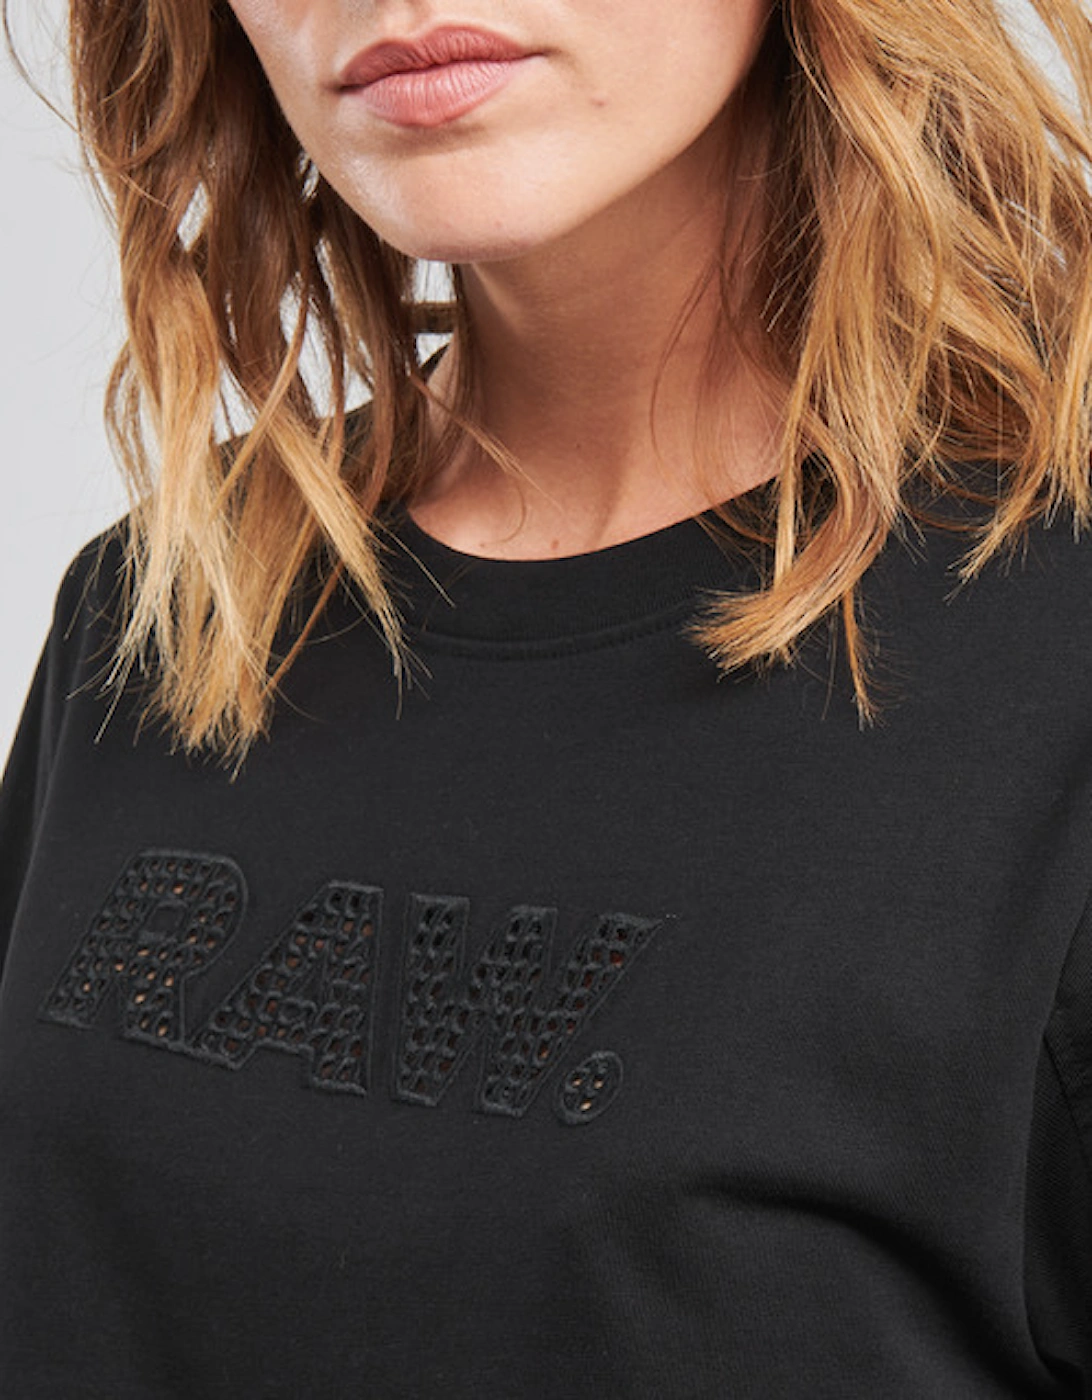 BOXY FIT RAW EMBROIDERY TEE